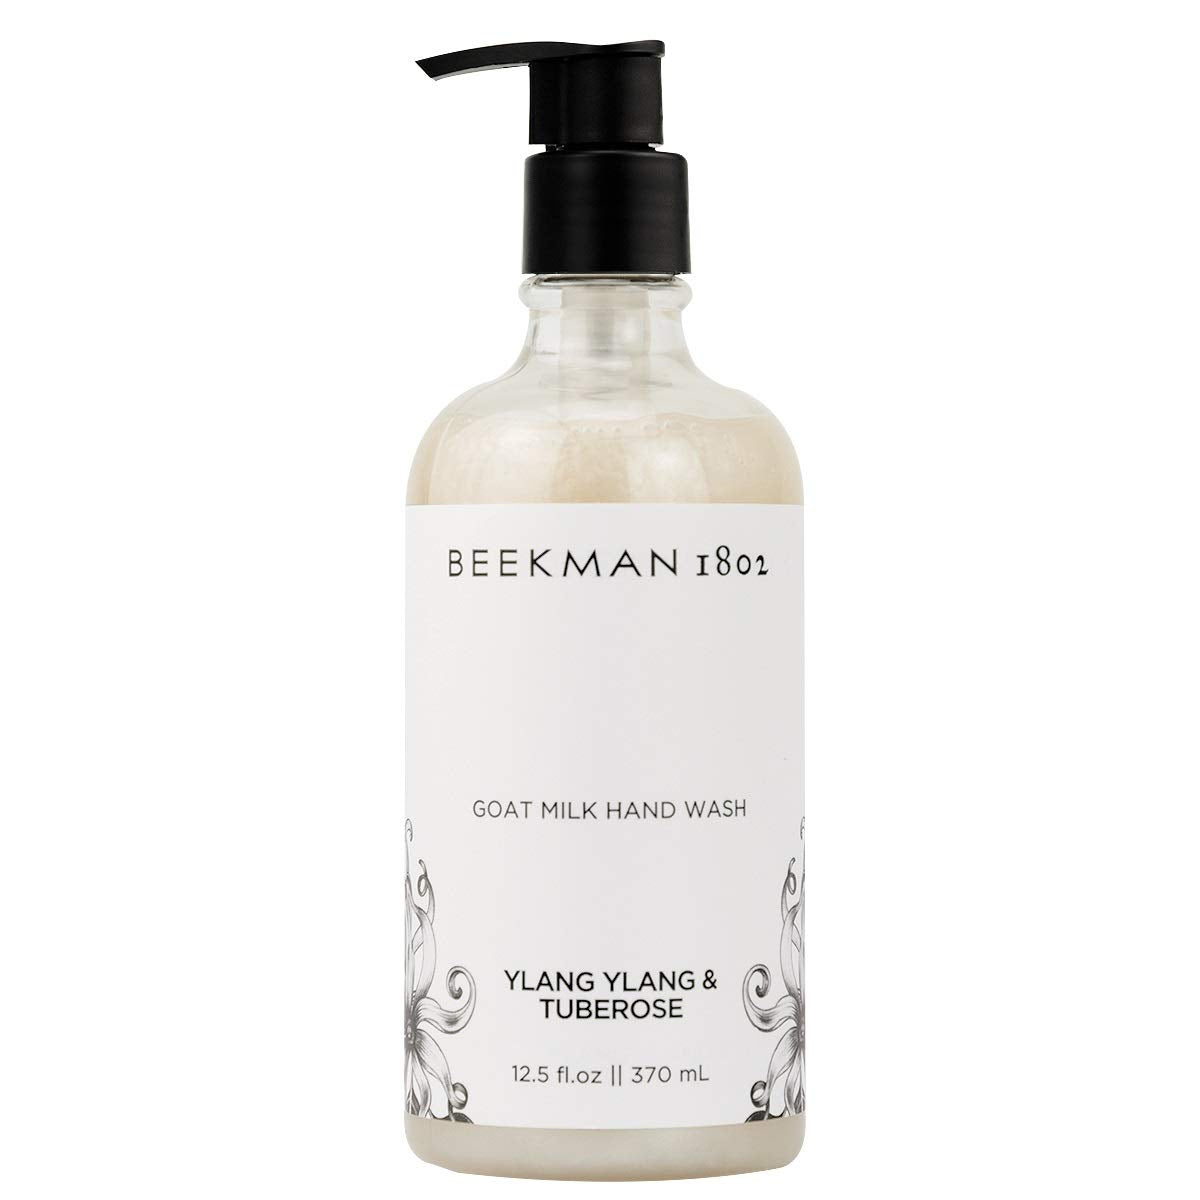 Beekman 1802 Ylang Ylang & Tuberose Goat Milk Hand & Body Wash - 12.5 Fluid Ounces - The Finished Room